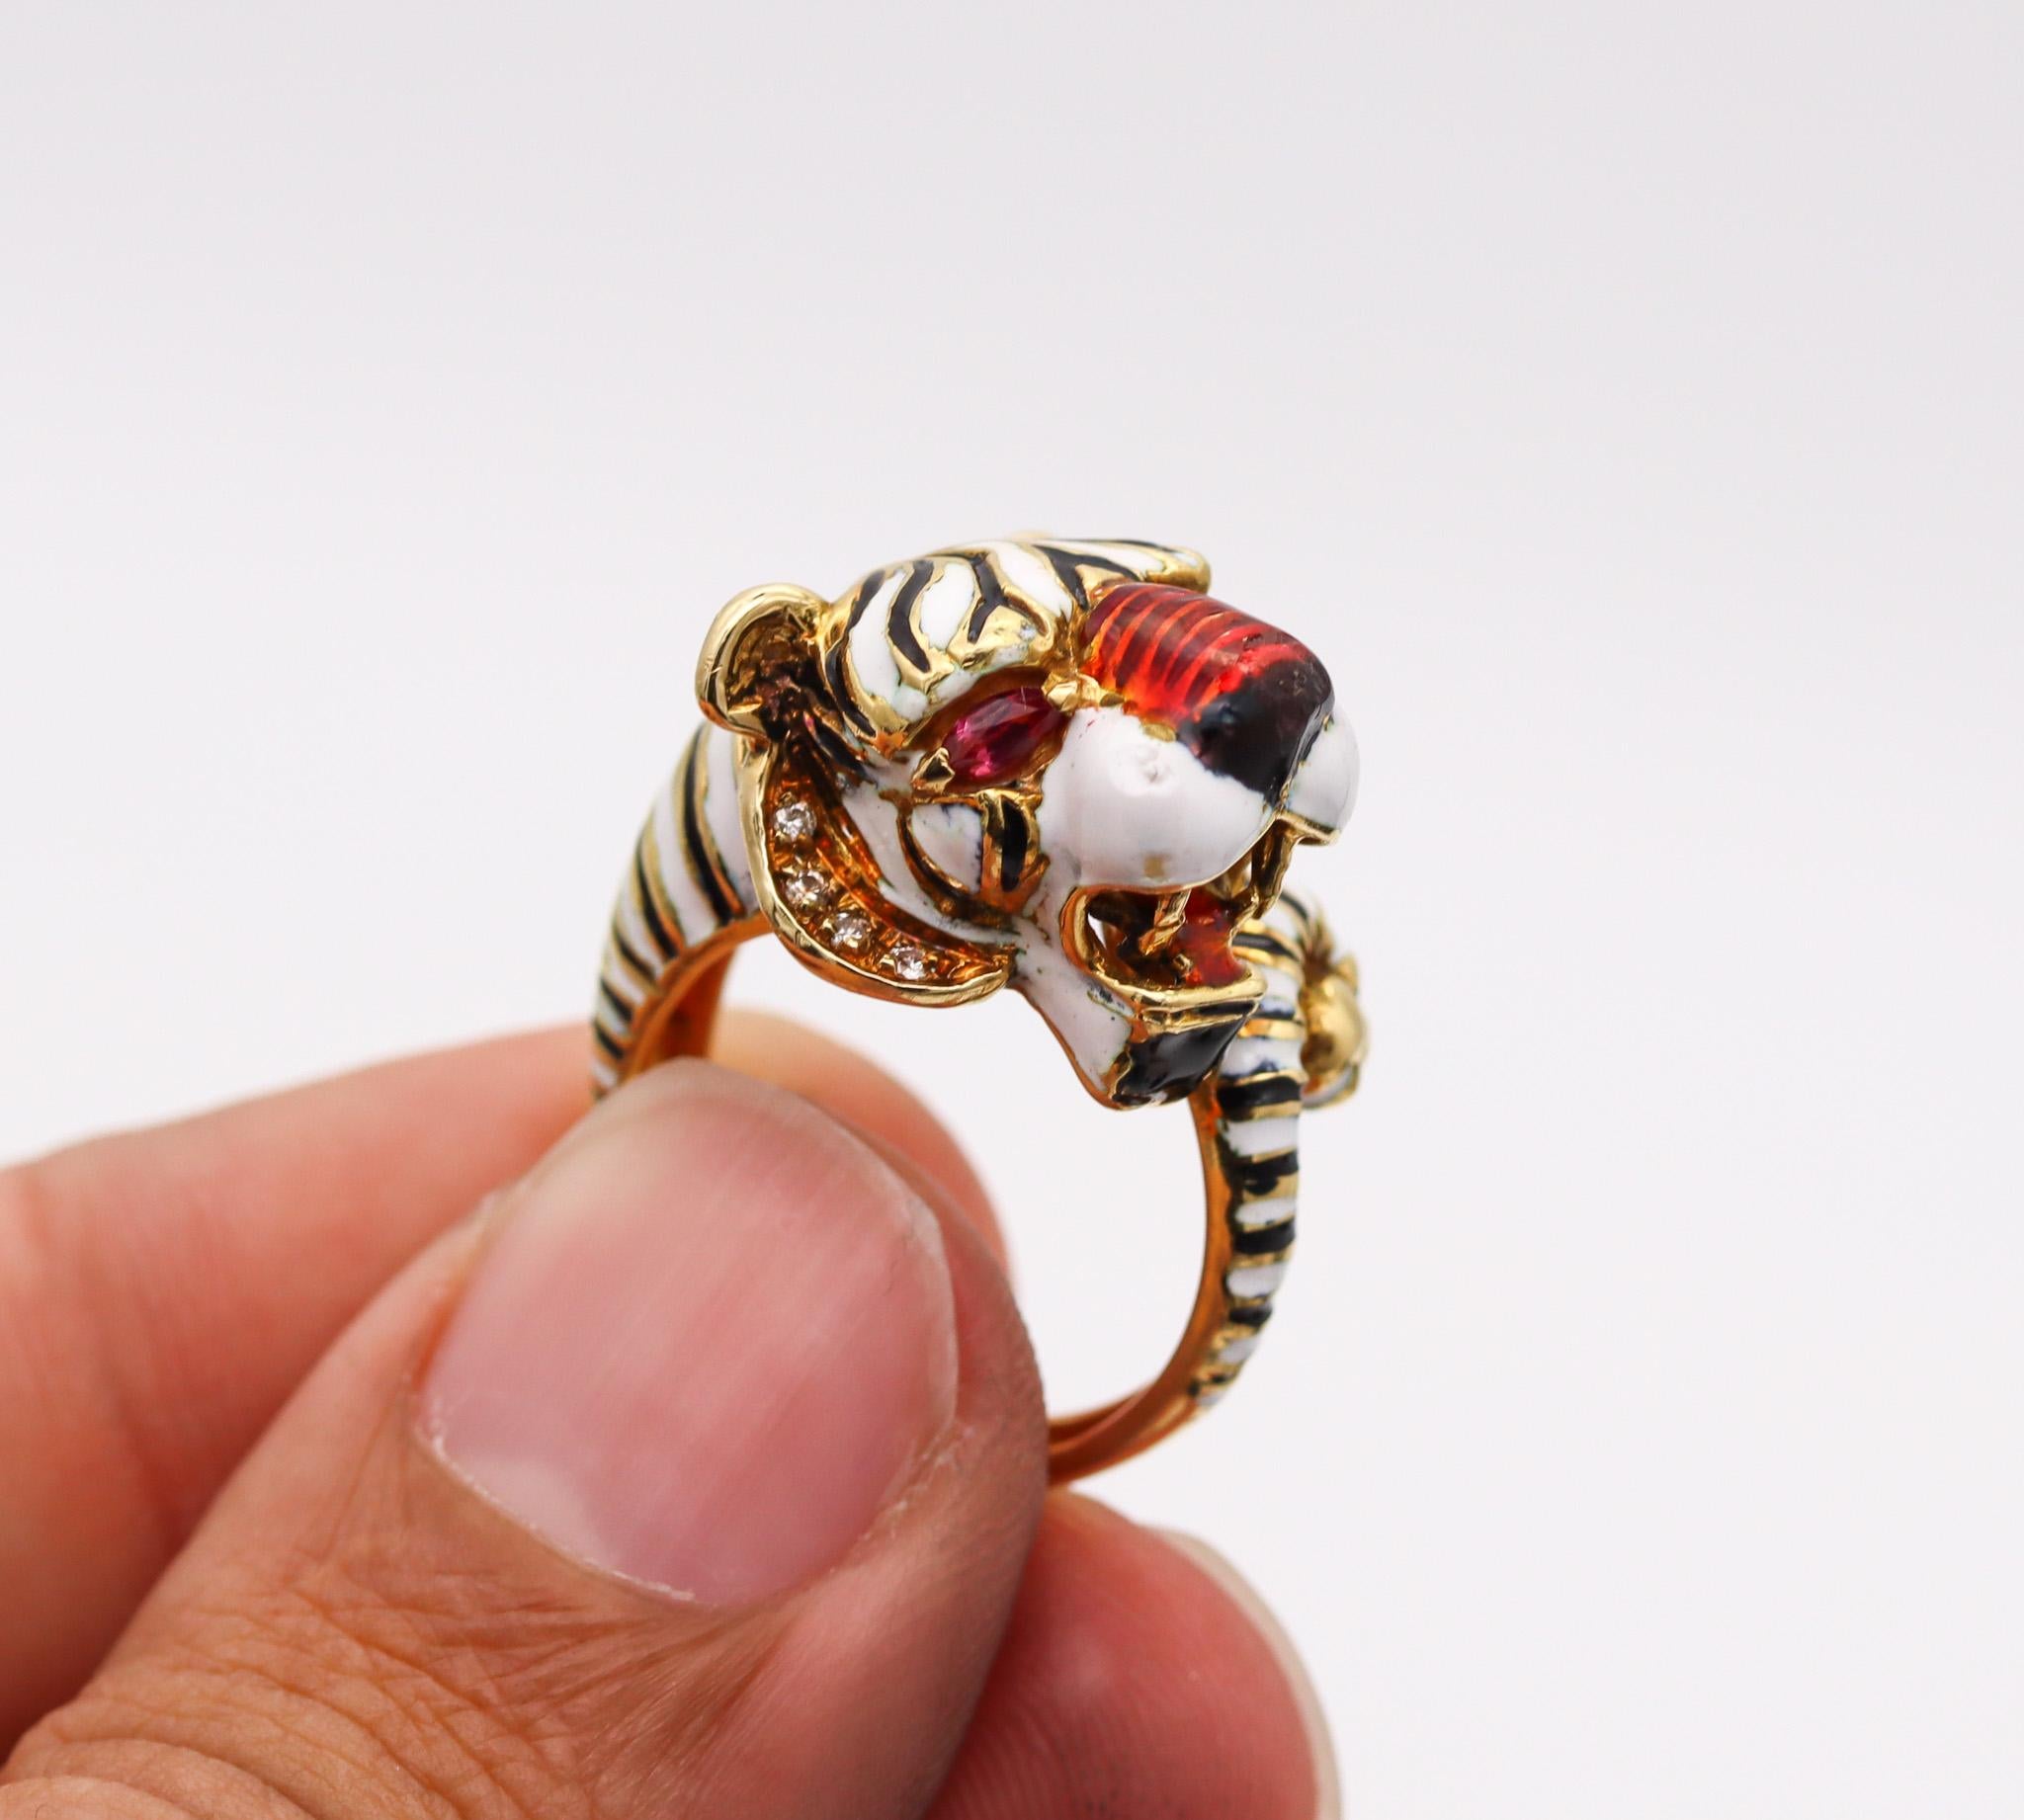 Women's Frascarolo Milano Enameled Tiger Cocktail Ring in 18Kt Gold Diamonds And Rubies For Sale